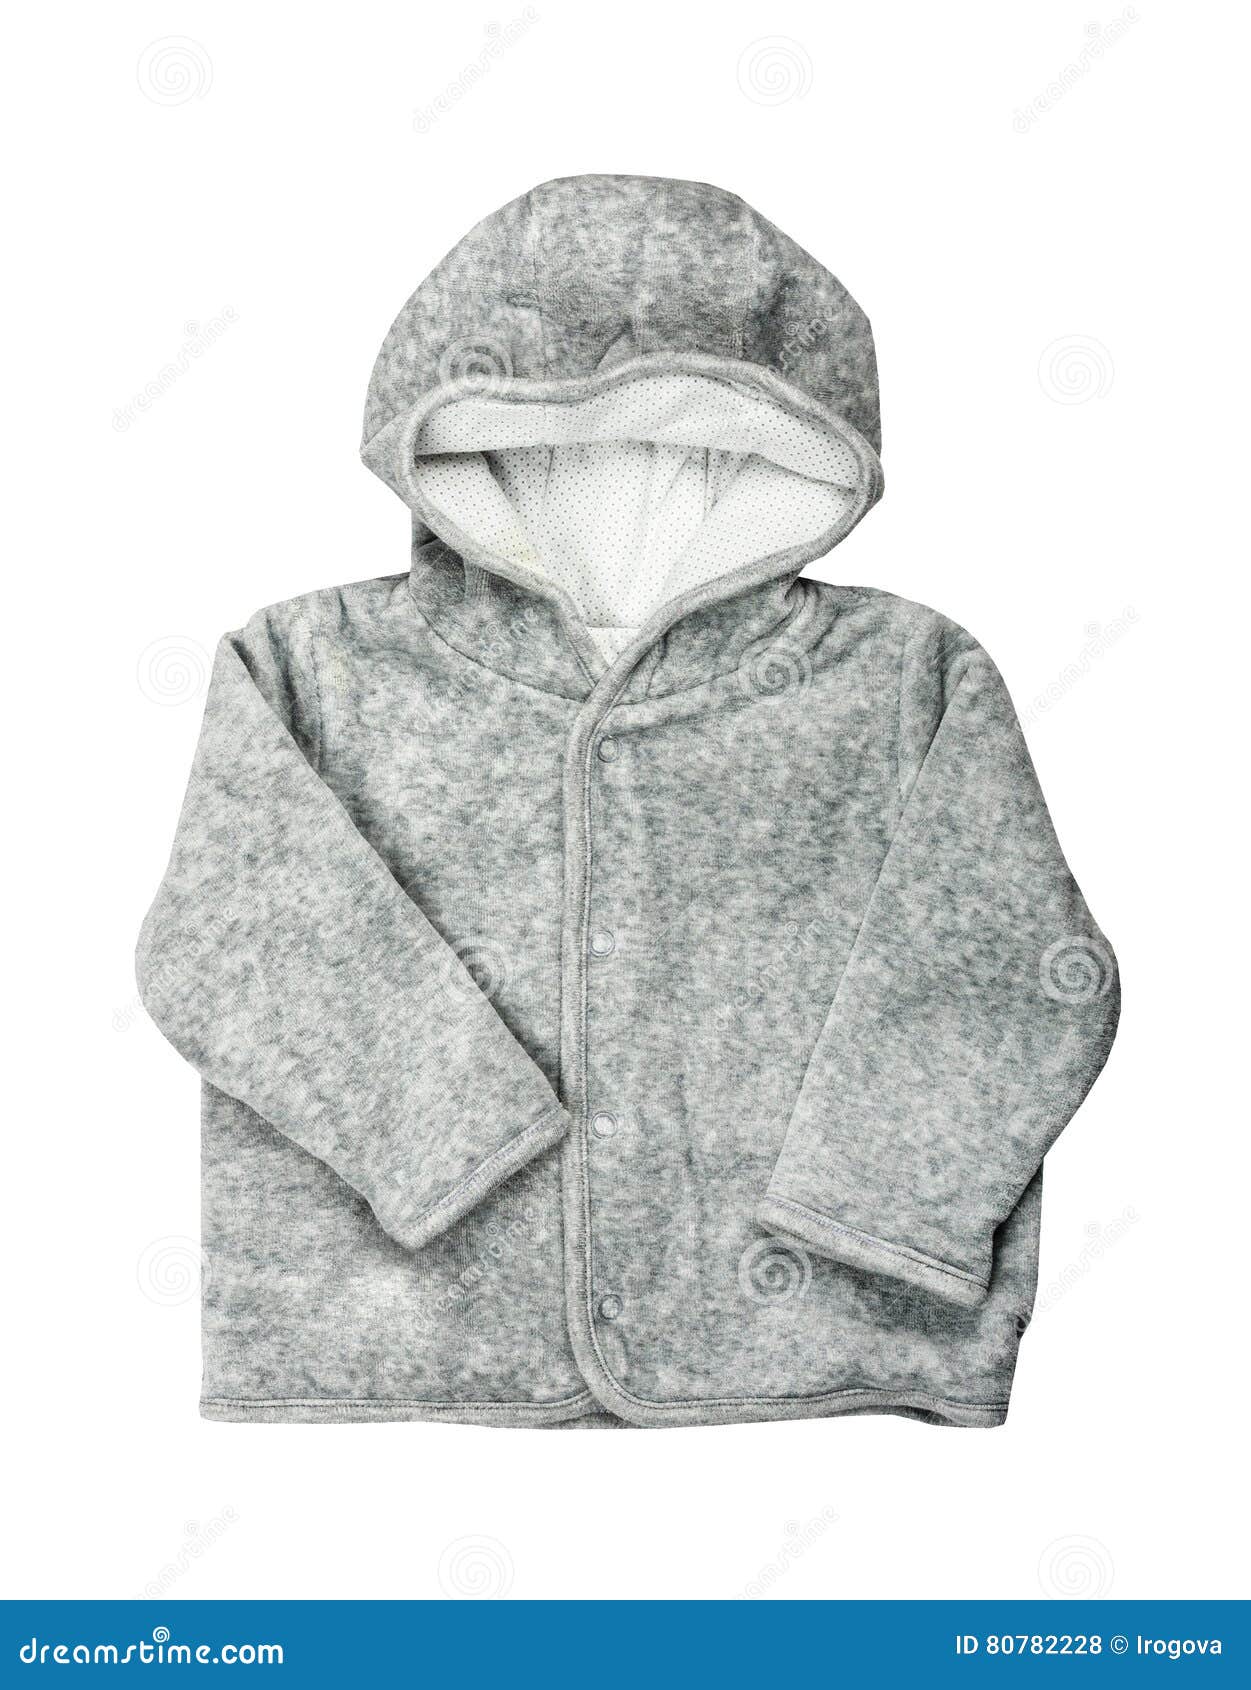 Gray Baby Clothes Hooded Sweatshirt Stock Photo - Image of adorable ...